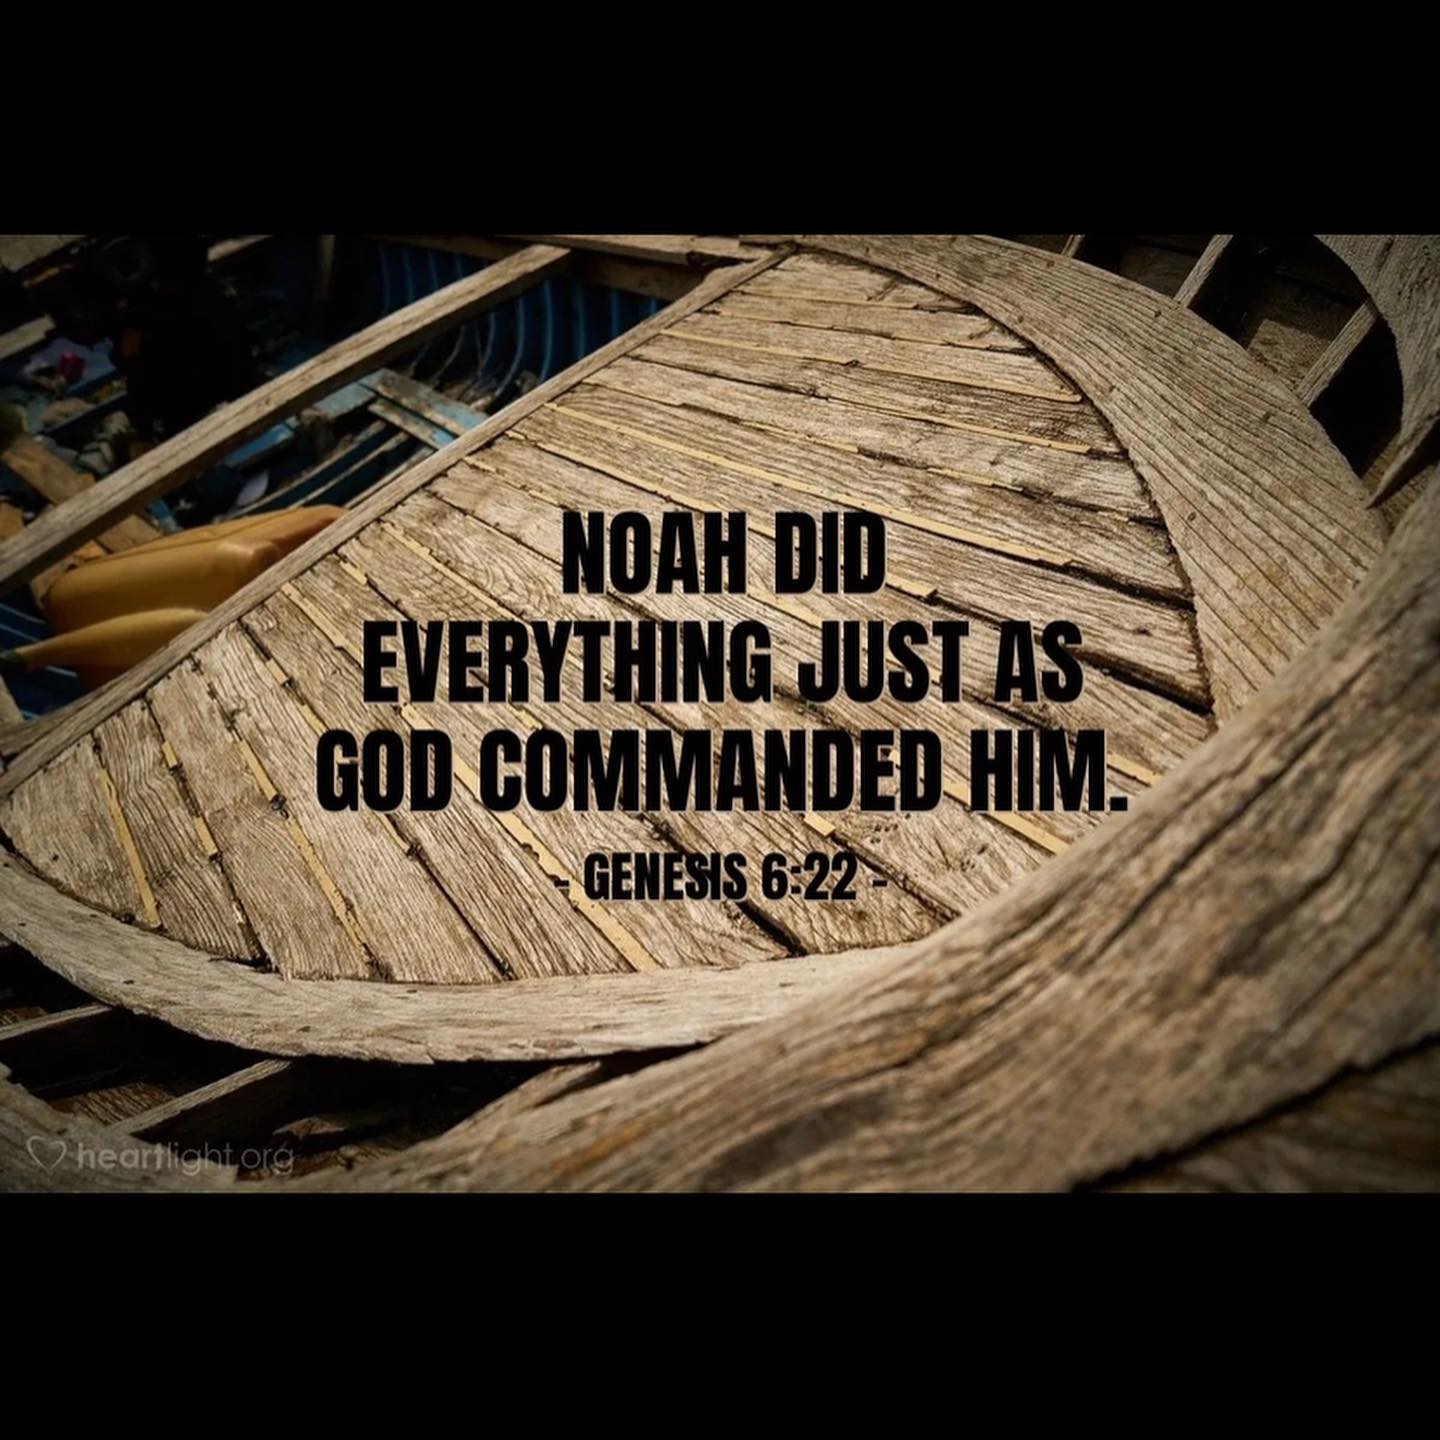 Noah was the first conspiracy theorist… and then it rained. He was rejected by society for building a giant boat in the middle of dry land and it took him nearly 100 years to build! But Noah’s obedience made others disobedience stand out. WHAT ABOUT YOU? The flood was a low point in the history of the world. How quickly humanity forgot about God. Genesis Ch. 6 shows us what God’s grace and provision looks like. Genesis Ch. 7 shows us what God’s judgement looks like. We learn that God is serious about holiness; we learn that although God is loving, He will deal with sin justly. Noah’s response to God shows us what faith and obedience looks like.Join us Sunday 10AM @fallbrookvineyardchurch as our dear friend, Pastor Gerardo teaches us through Genesis Ch 6 and 7 in a message titled, “What About You?”. We will gather in the olive grove🌳Please bring your chairs and your bibles. Enjoy fellowship after church! @jimmy_and_tiffanies_tacos and @thevineyard1924 makes for a delightful Sunday! #noah#theflood#godsprovision#godsgrace#godscovering#godsjudgement#obedience#faith #wordofgod#thewaythetruththelife#worship#prayer #praise#praisethelord#community #support #love#familyofgod #outdoorchurch #organicchurch #outlawchurch #dogfriendlychurch